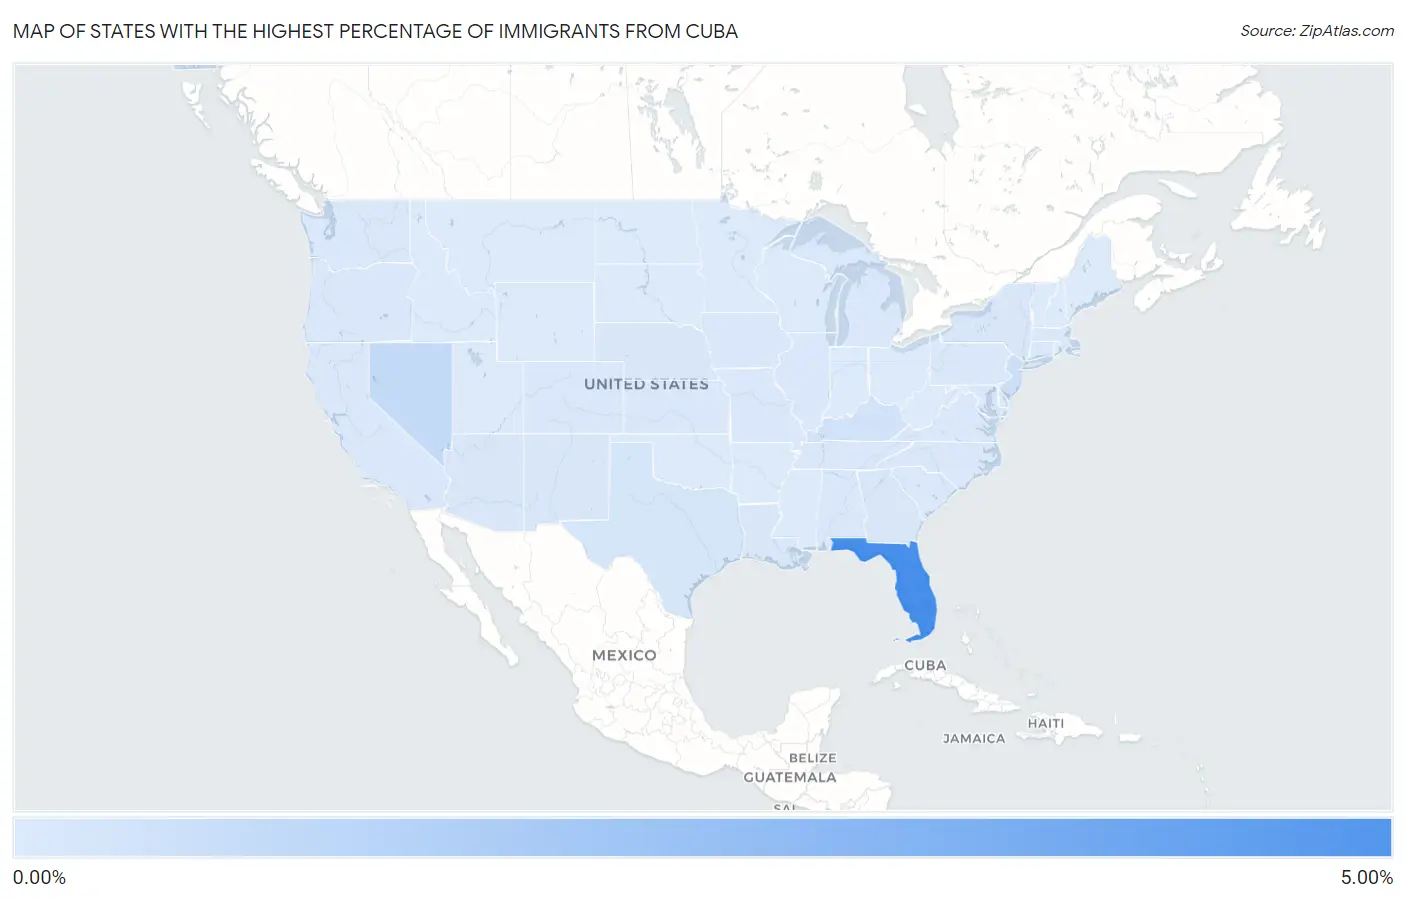 States with the Highest Percentage of Immigrants from Cuba in the United States Map